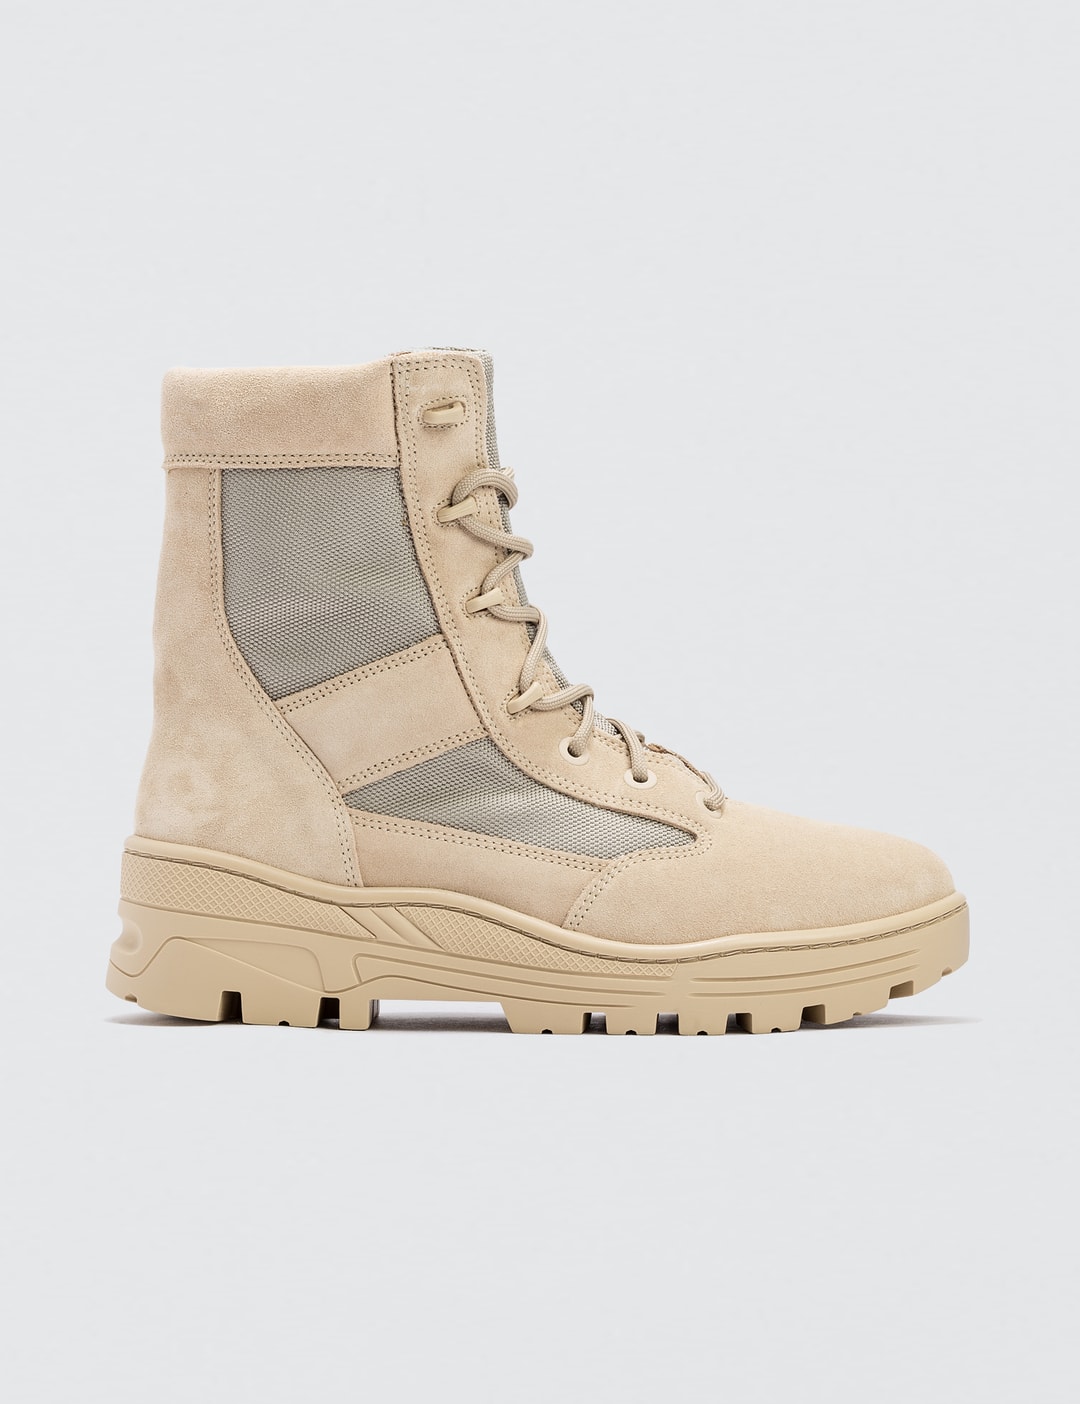 YEEZY Season 4 Combat Boot | - Curated Fashion and by Hypebeast